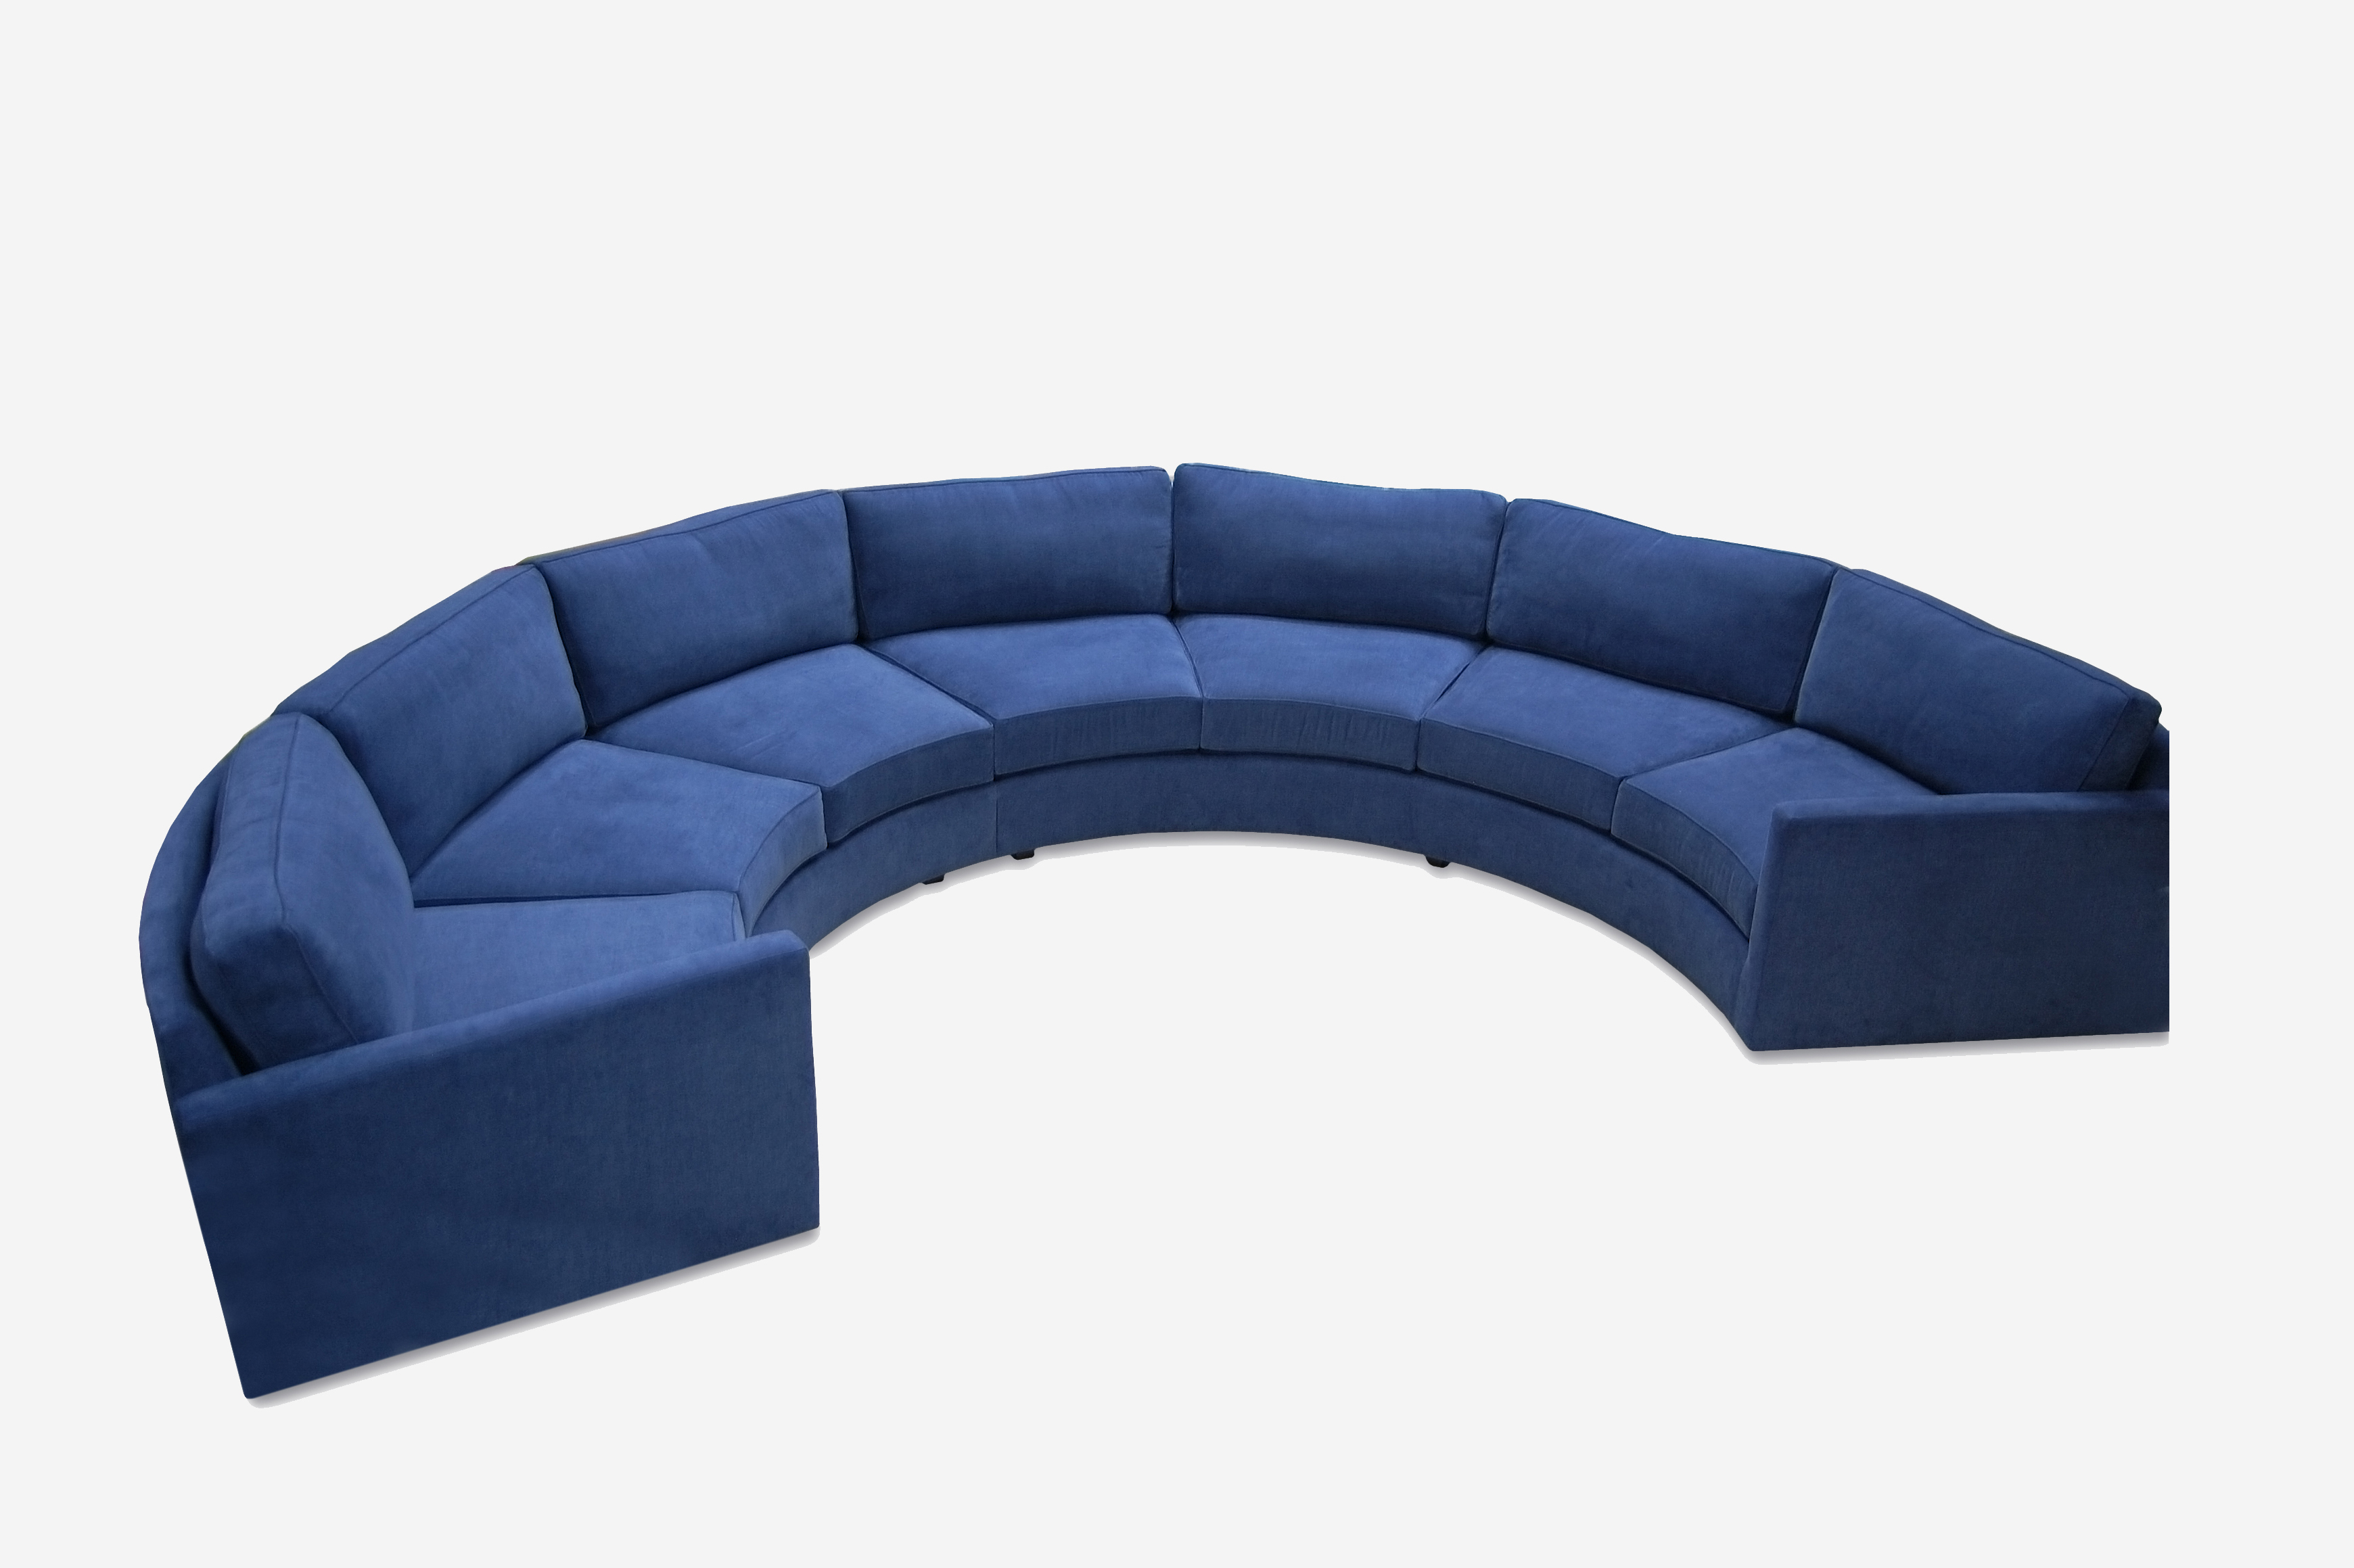 ROOM Austin Curved Sectional Blue Piped Seam Cushions Flat Seam Arms and Back Kiln-Dried Wood Frame Round Legs Made to Order Customizable ROOM Furniture